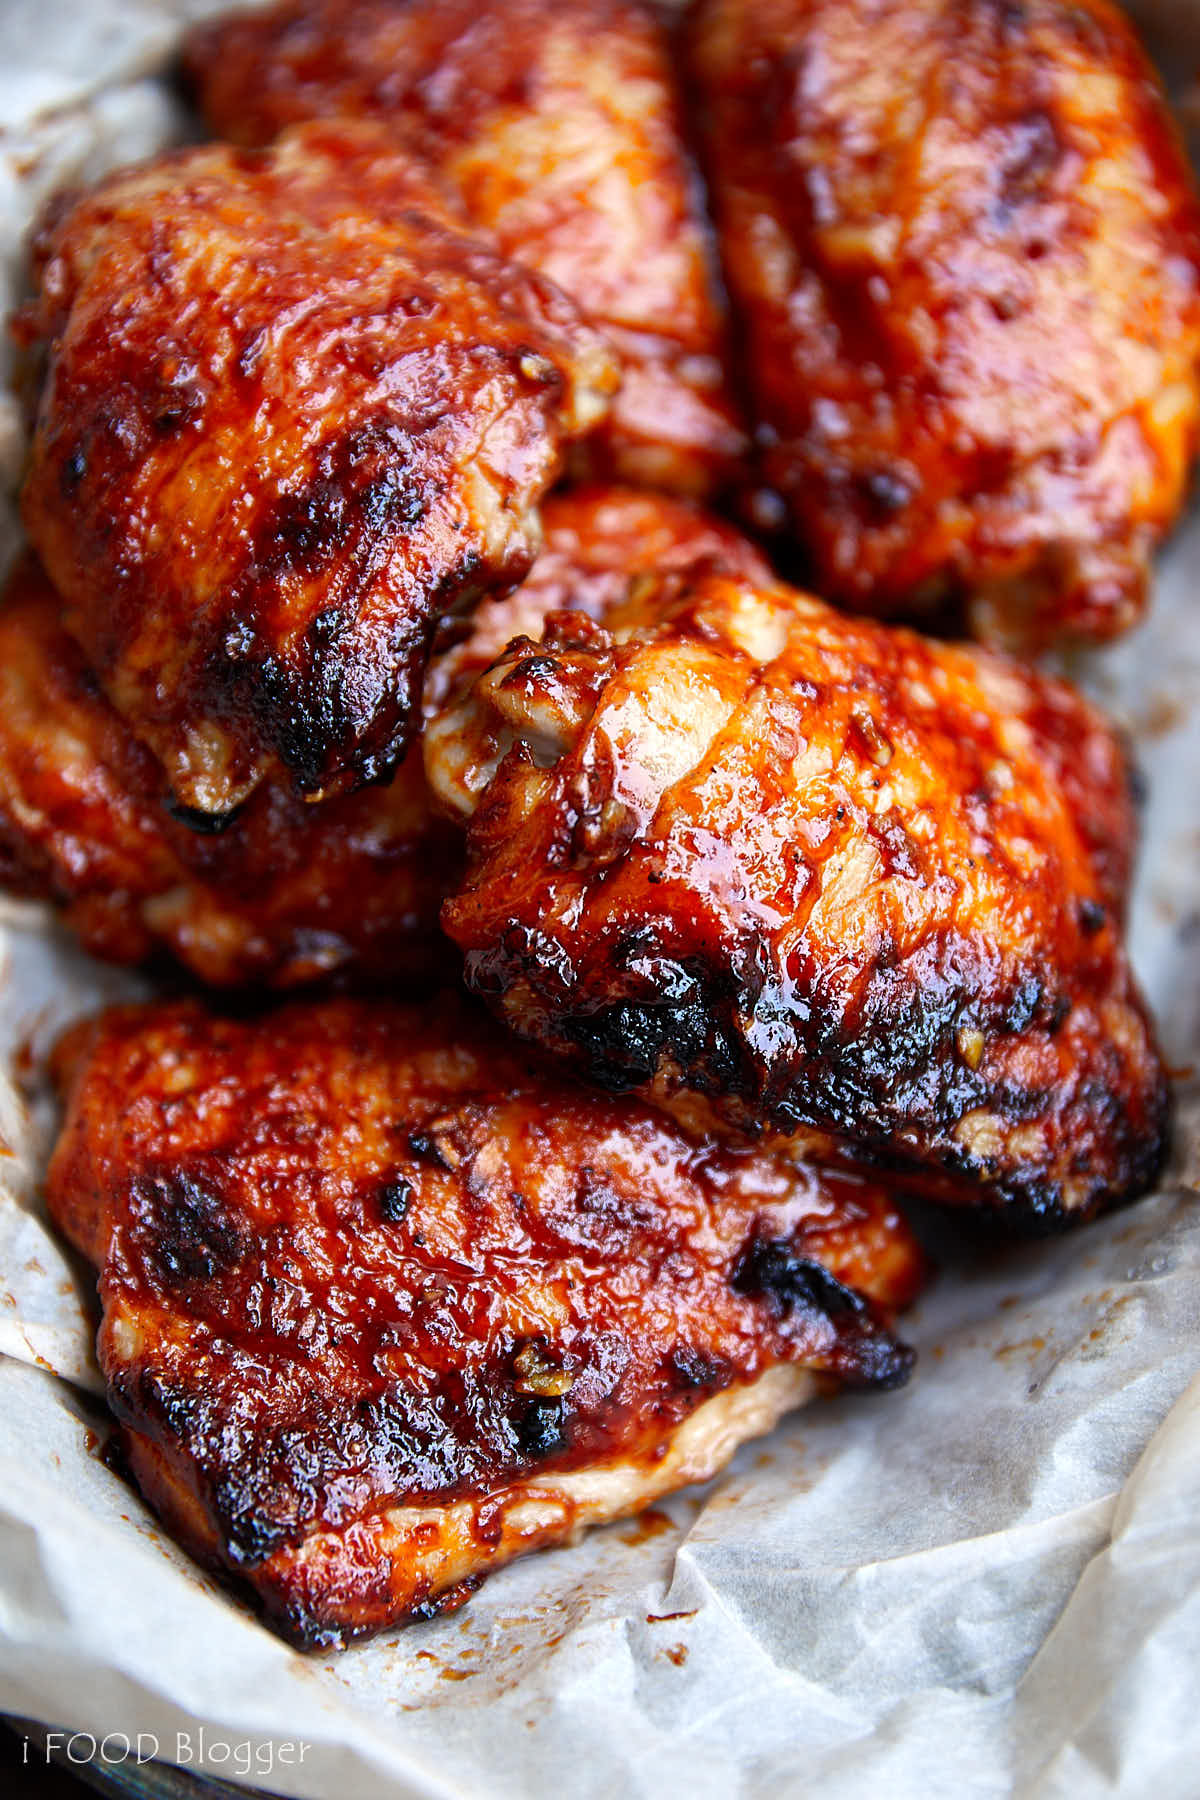 Baking Barbecue Chicken Thighs Fresh Baked Bbq Chicken Thighs Craving Tasty